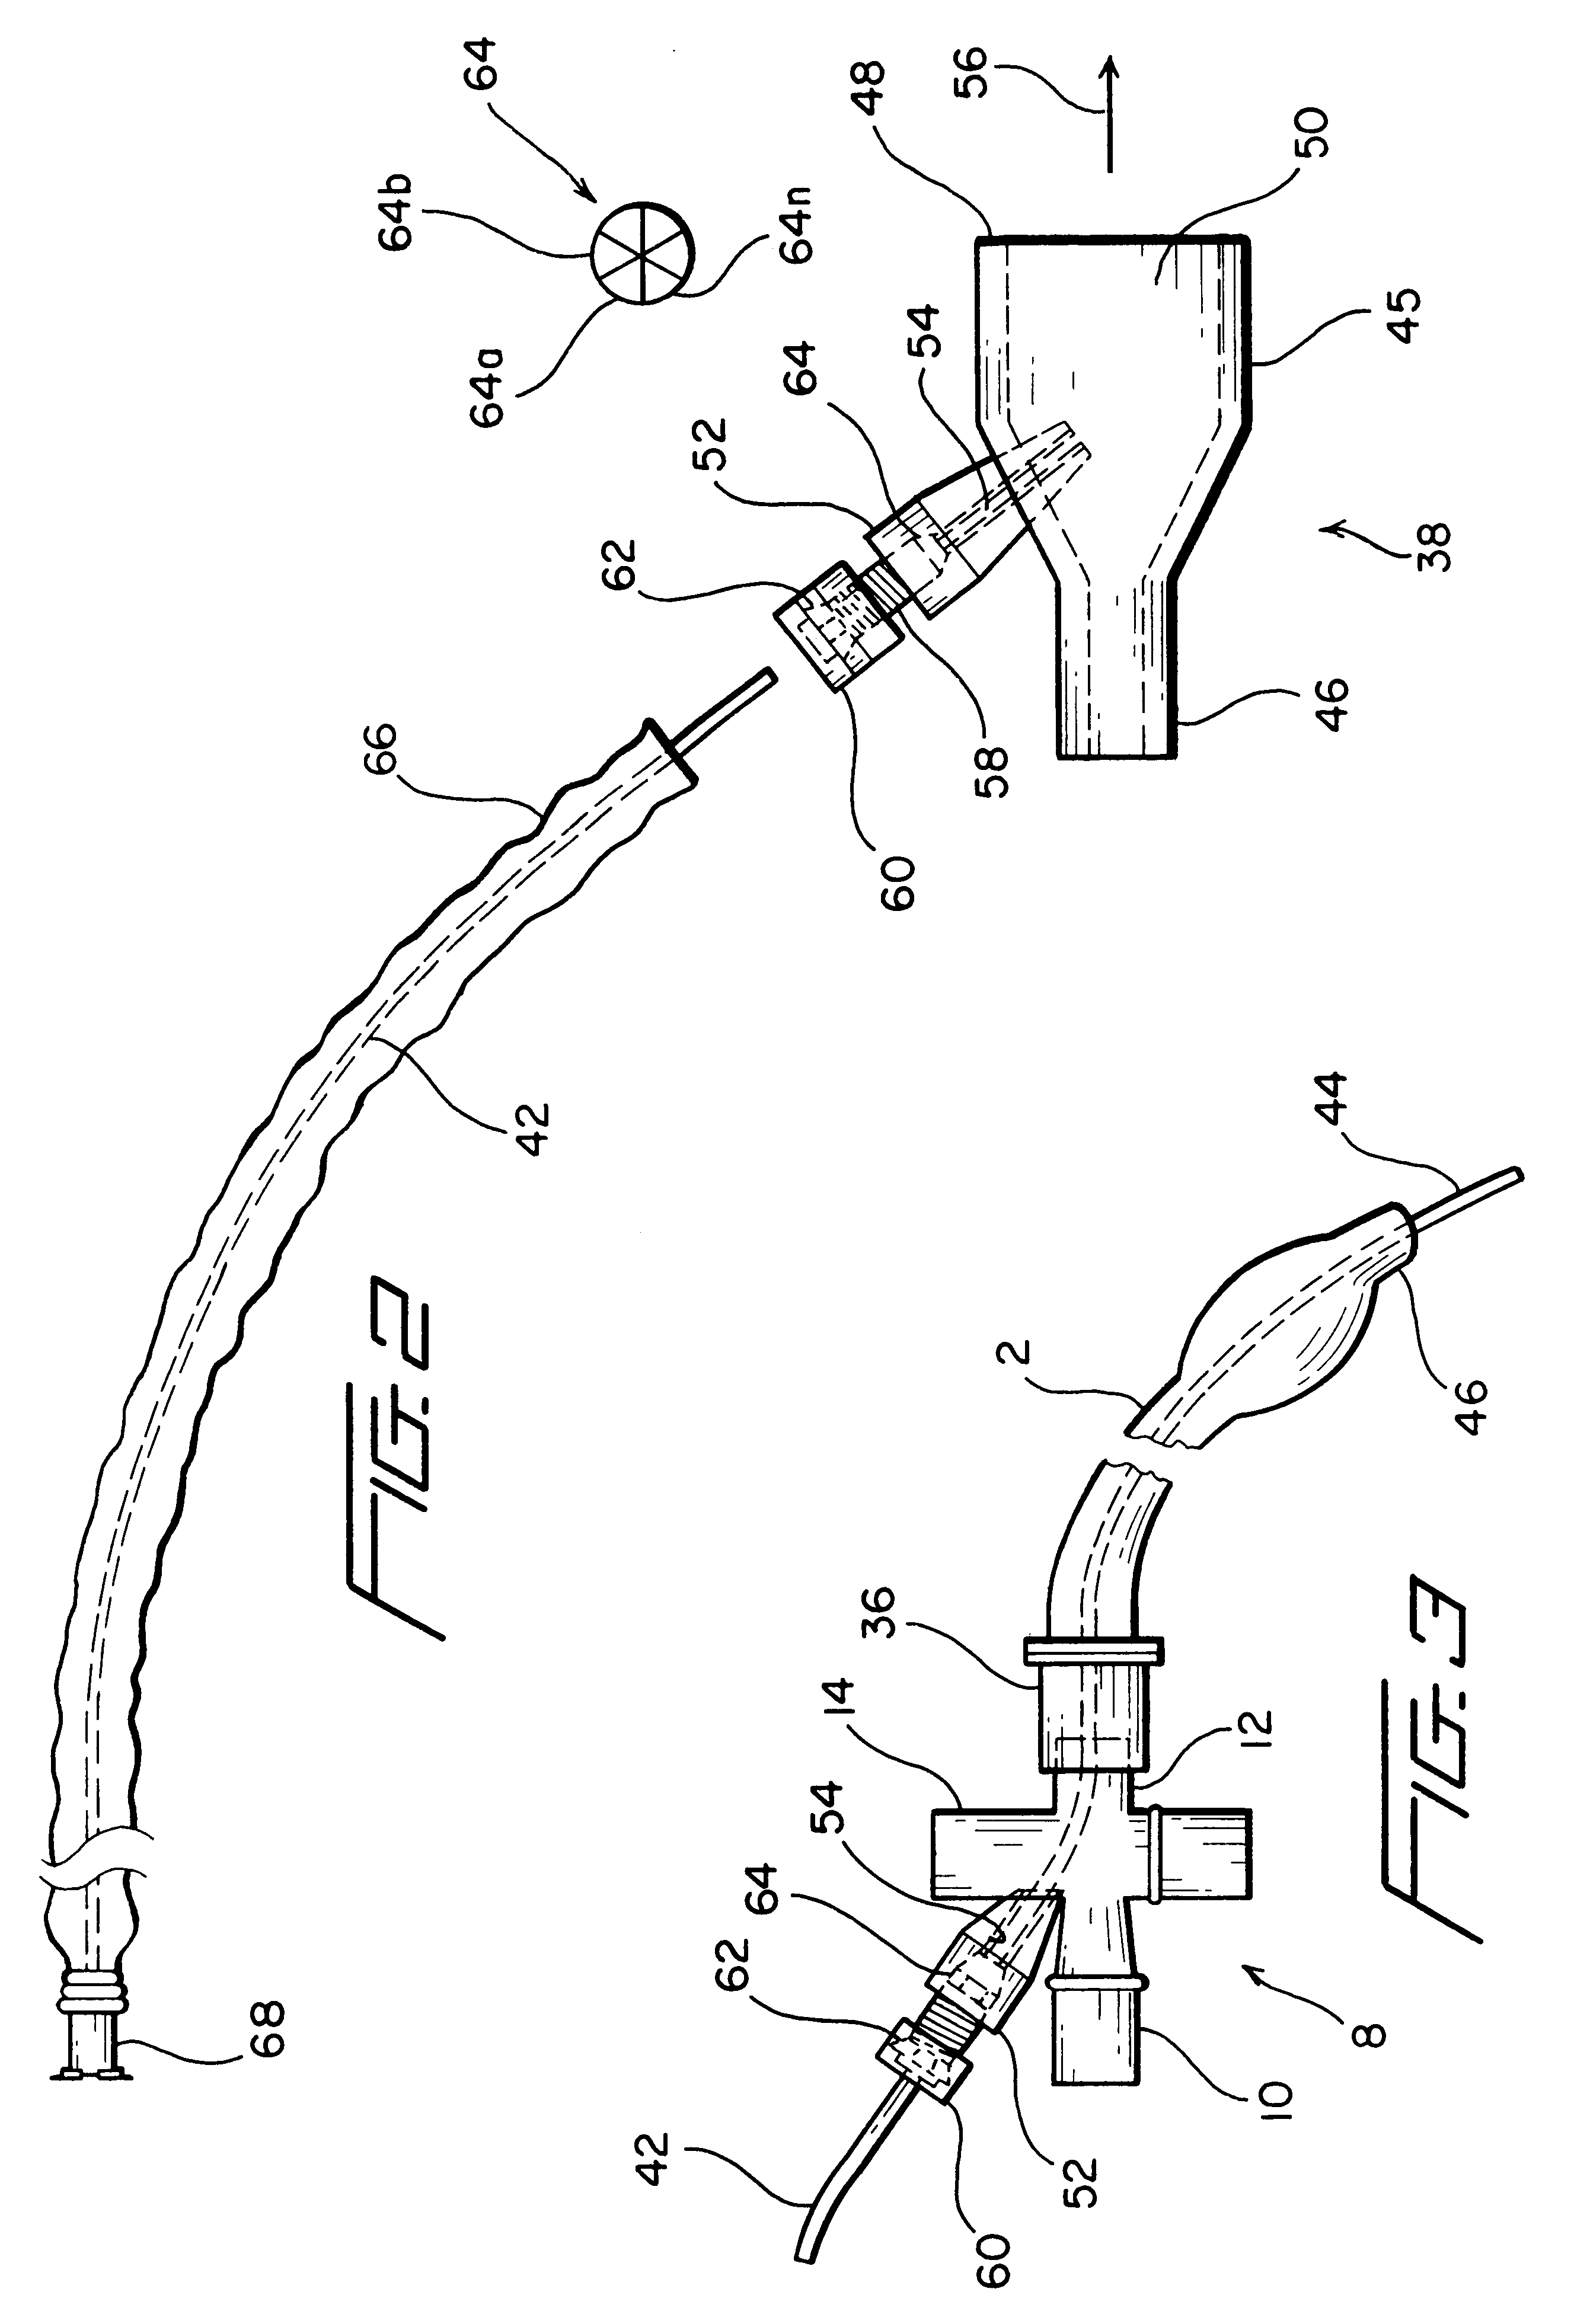 Adapter for localized treatment through a tracheal tube and method for use thereof